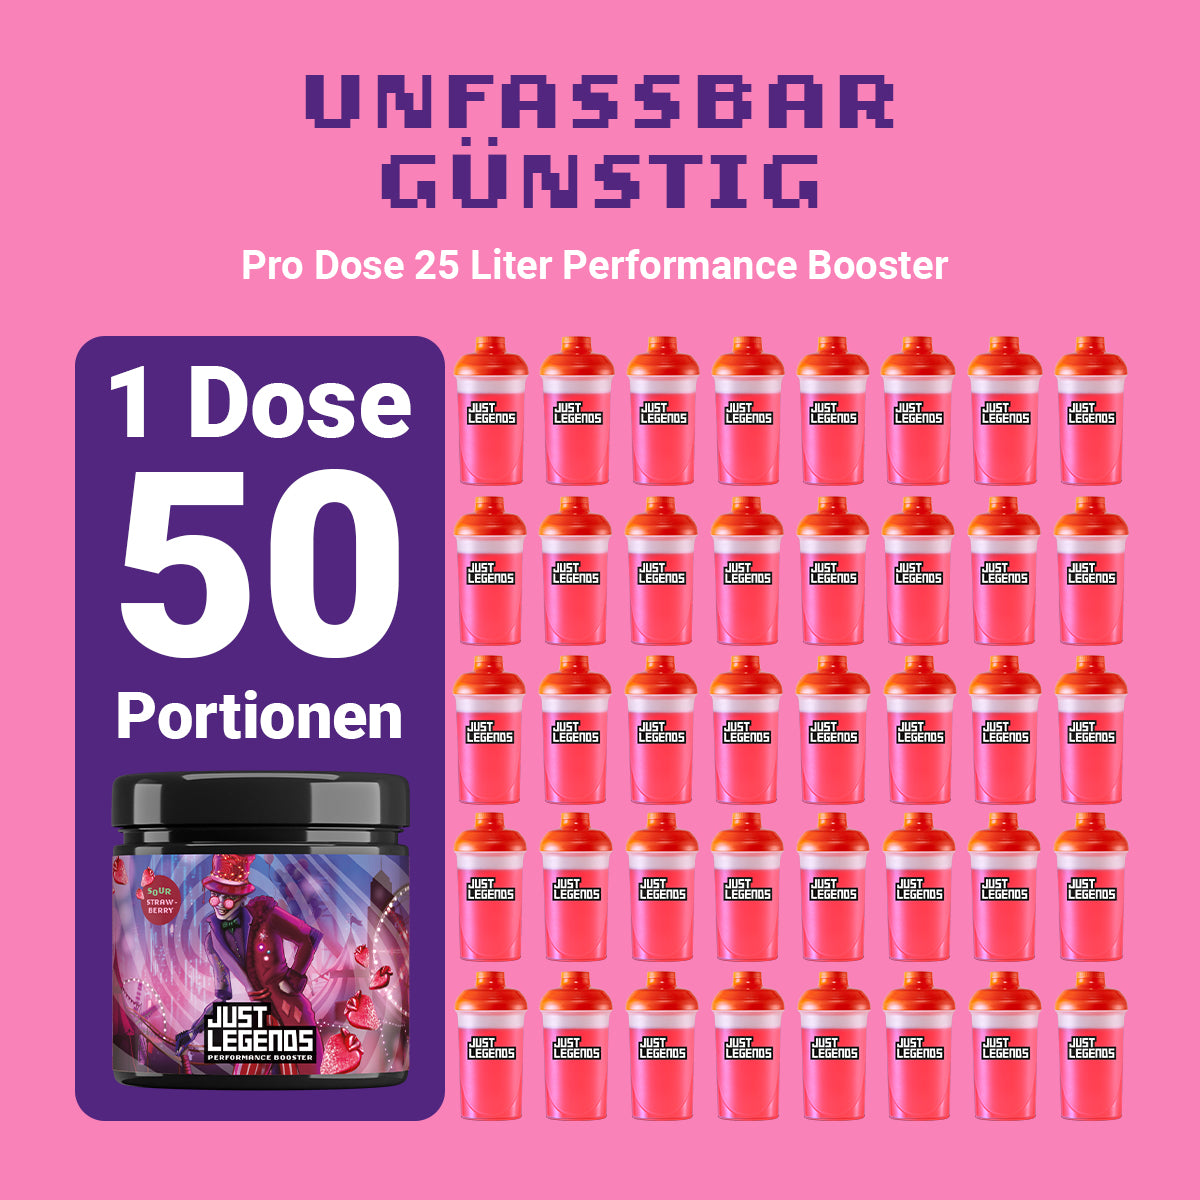 Performance Booster Sour Strawberry